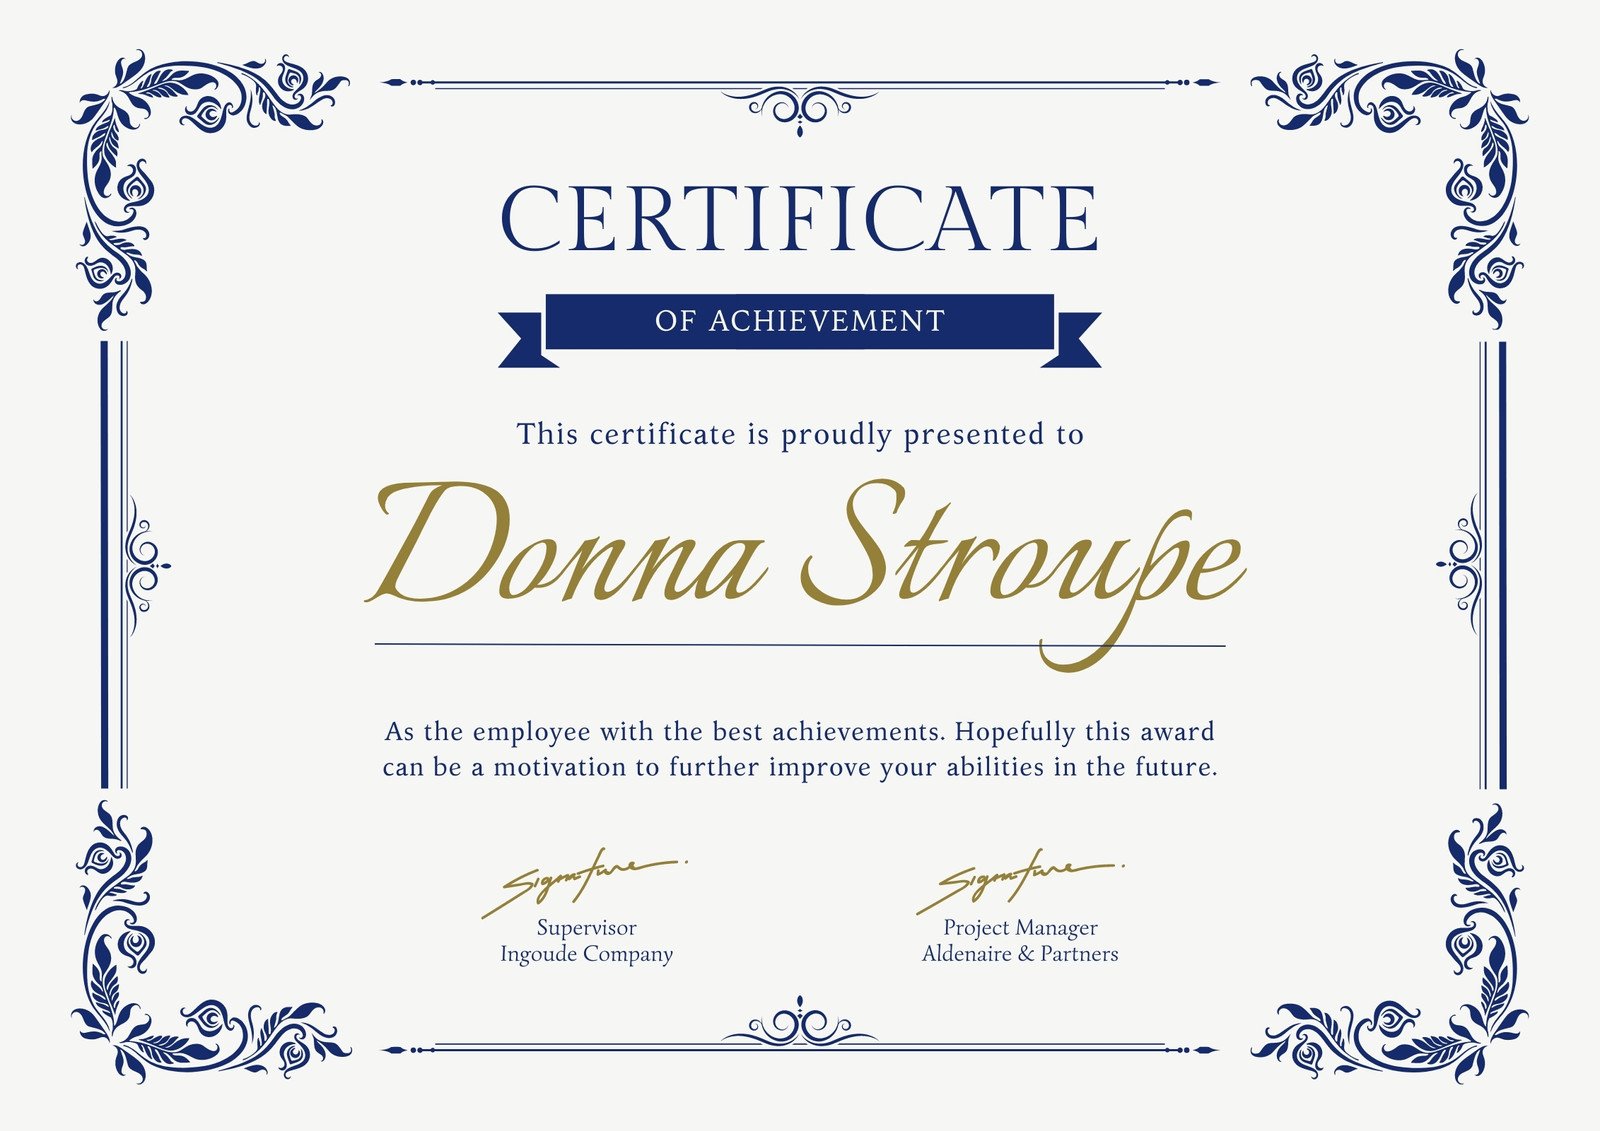 training certificate word template